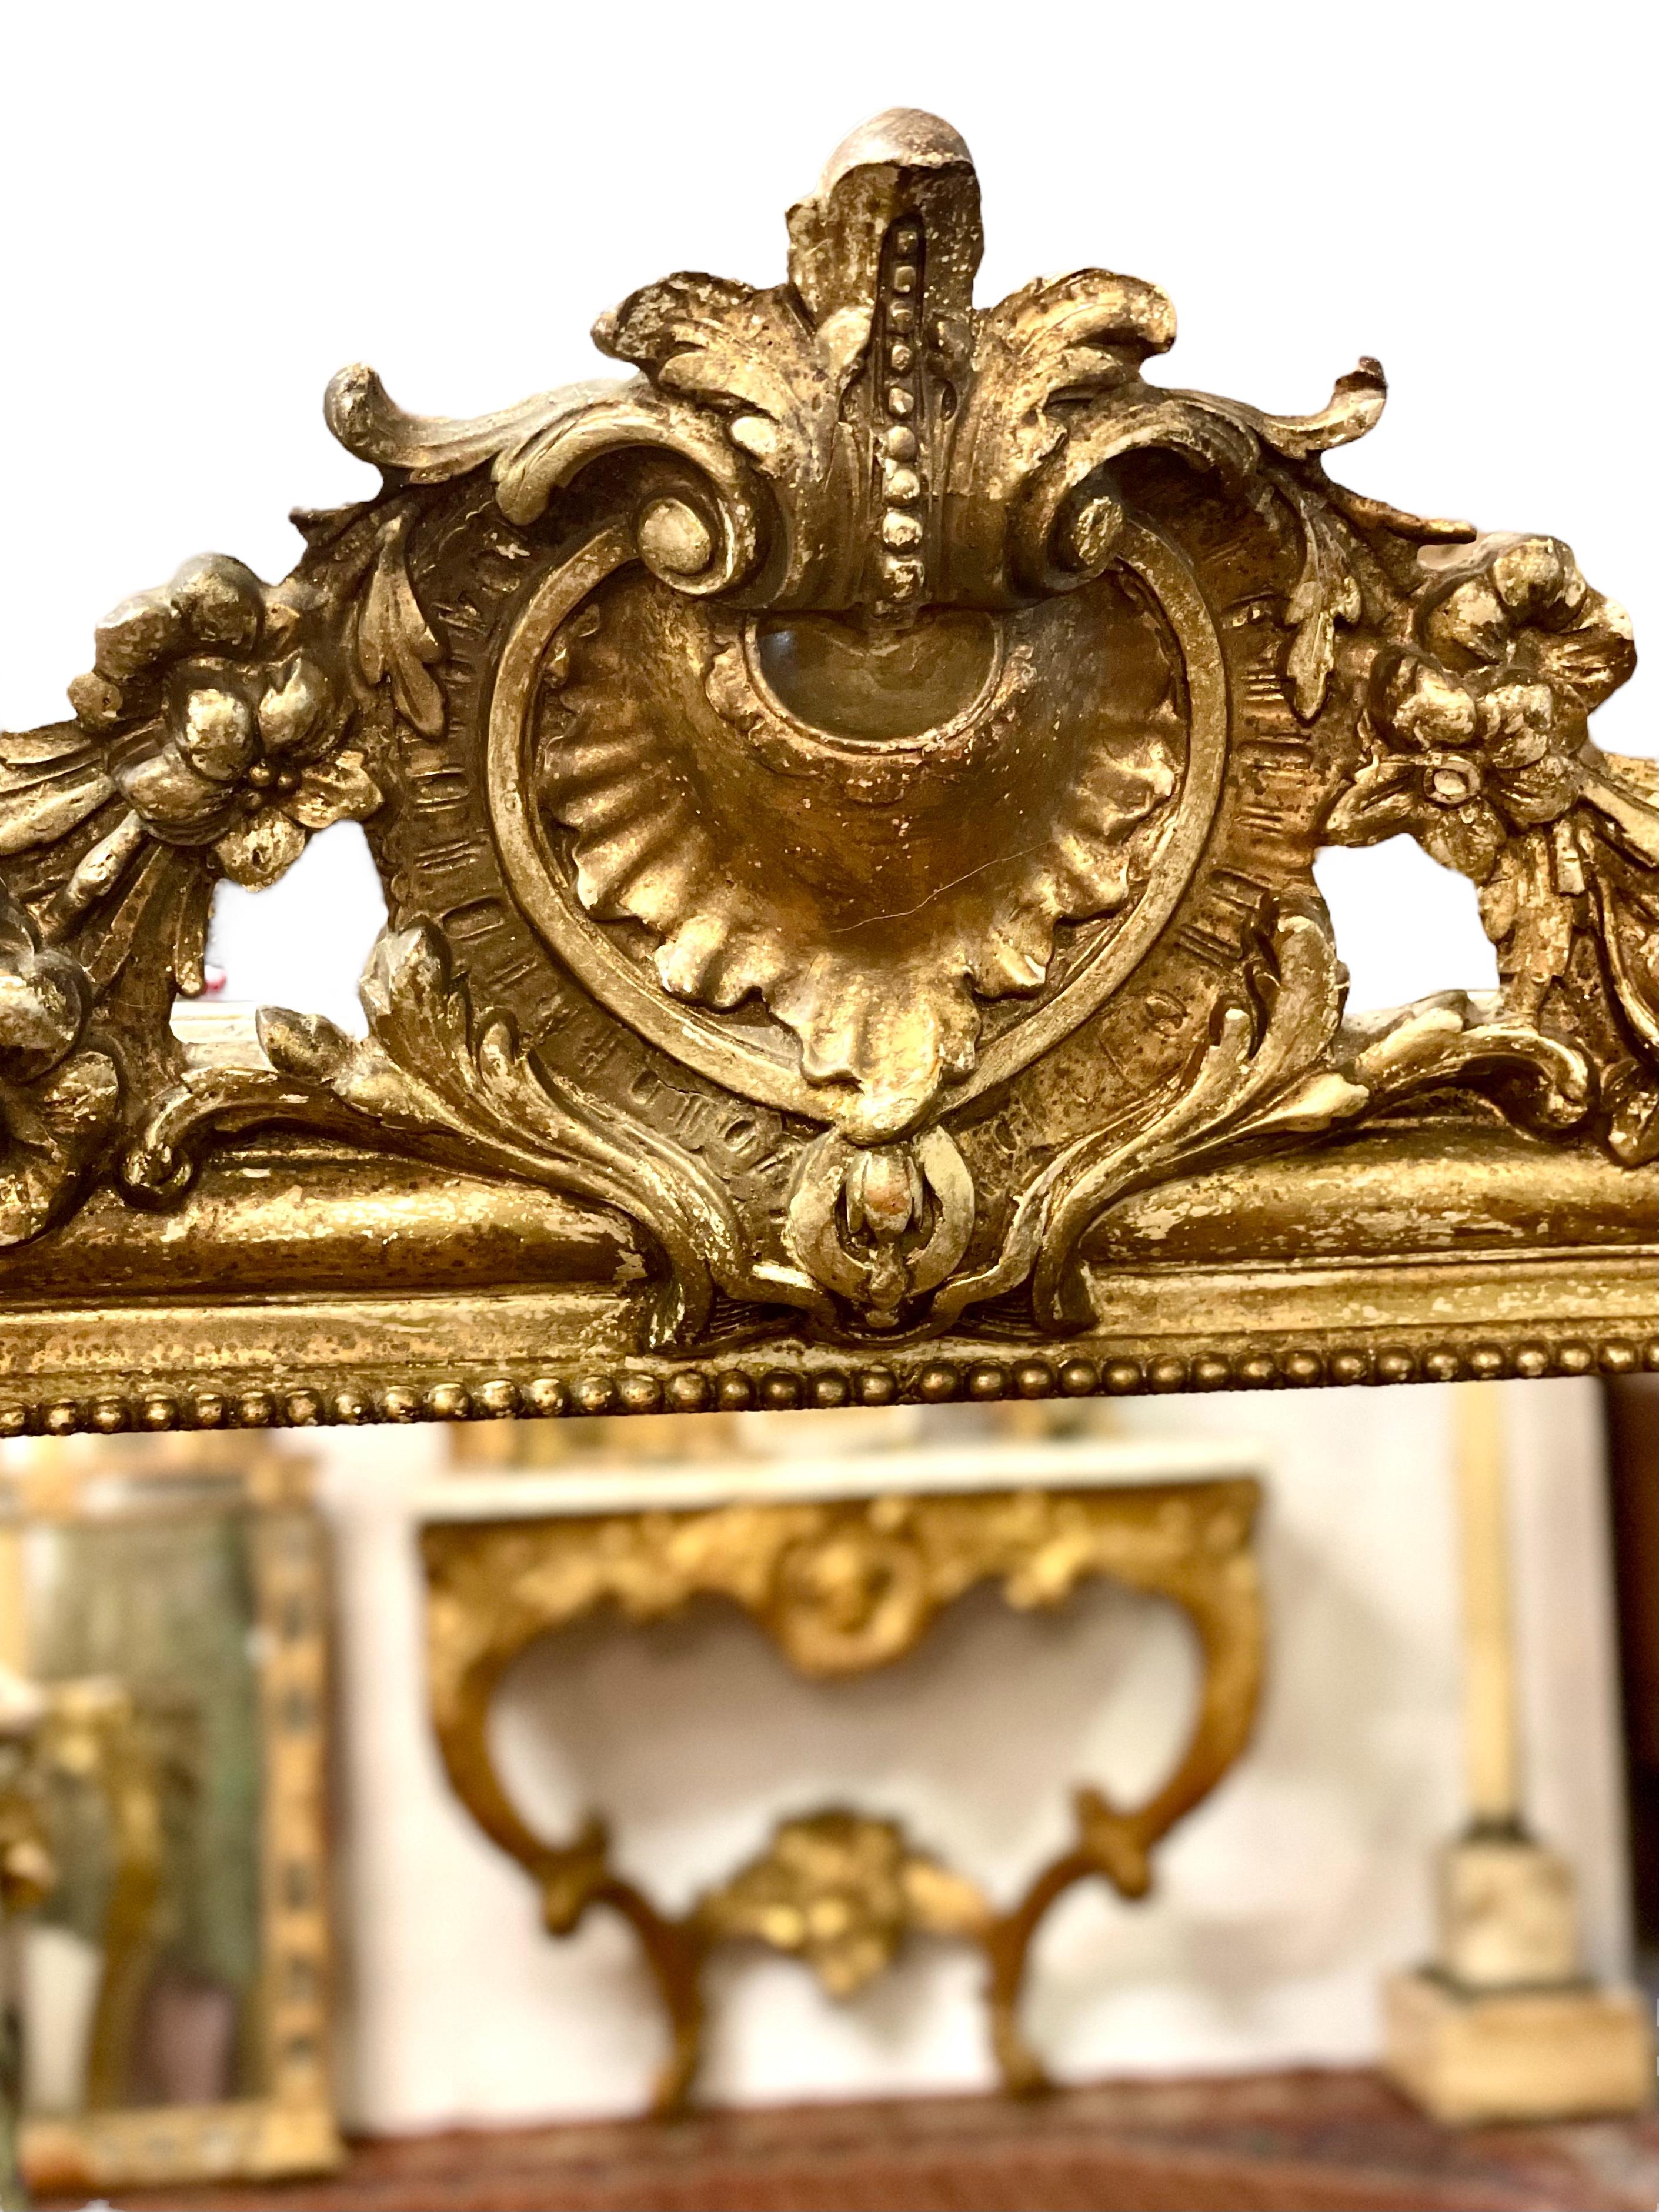 A gleaming 19th century Louis Philippe gilt mirror with extravagant shell and flower cartouche. Typical of the style, this beautiful mirror features the elegantly rounded upper corners and clean lines of the period, and features the classic